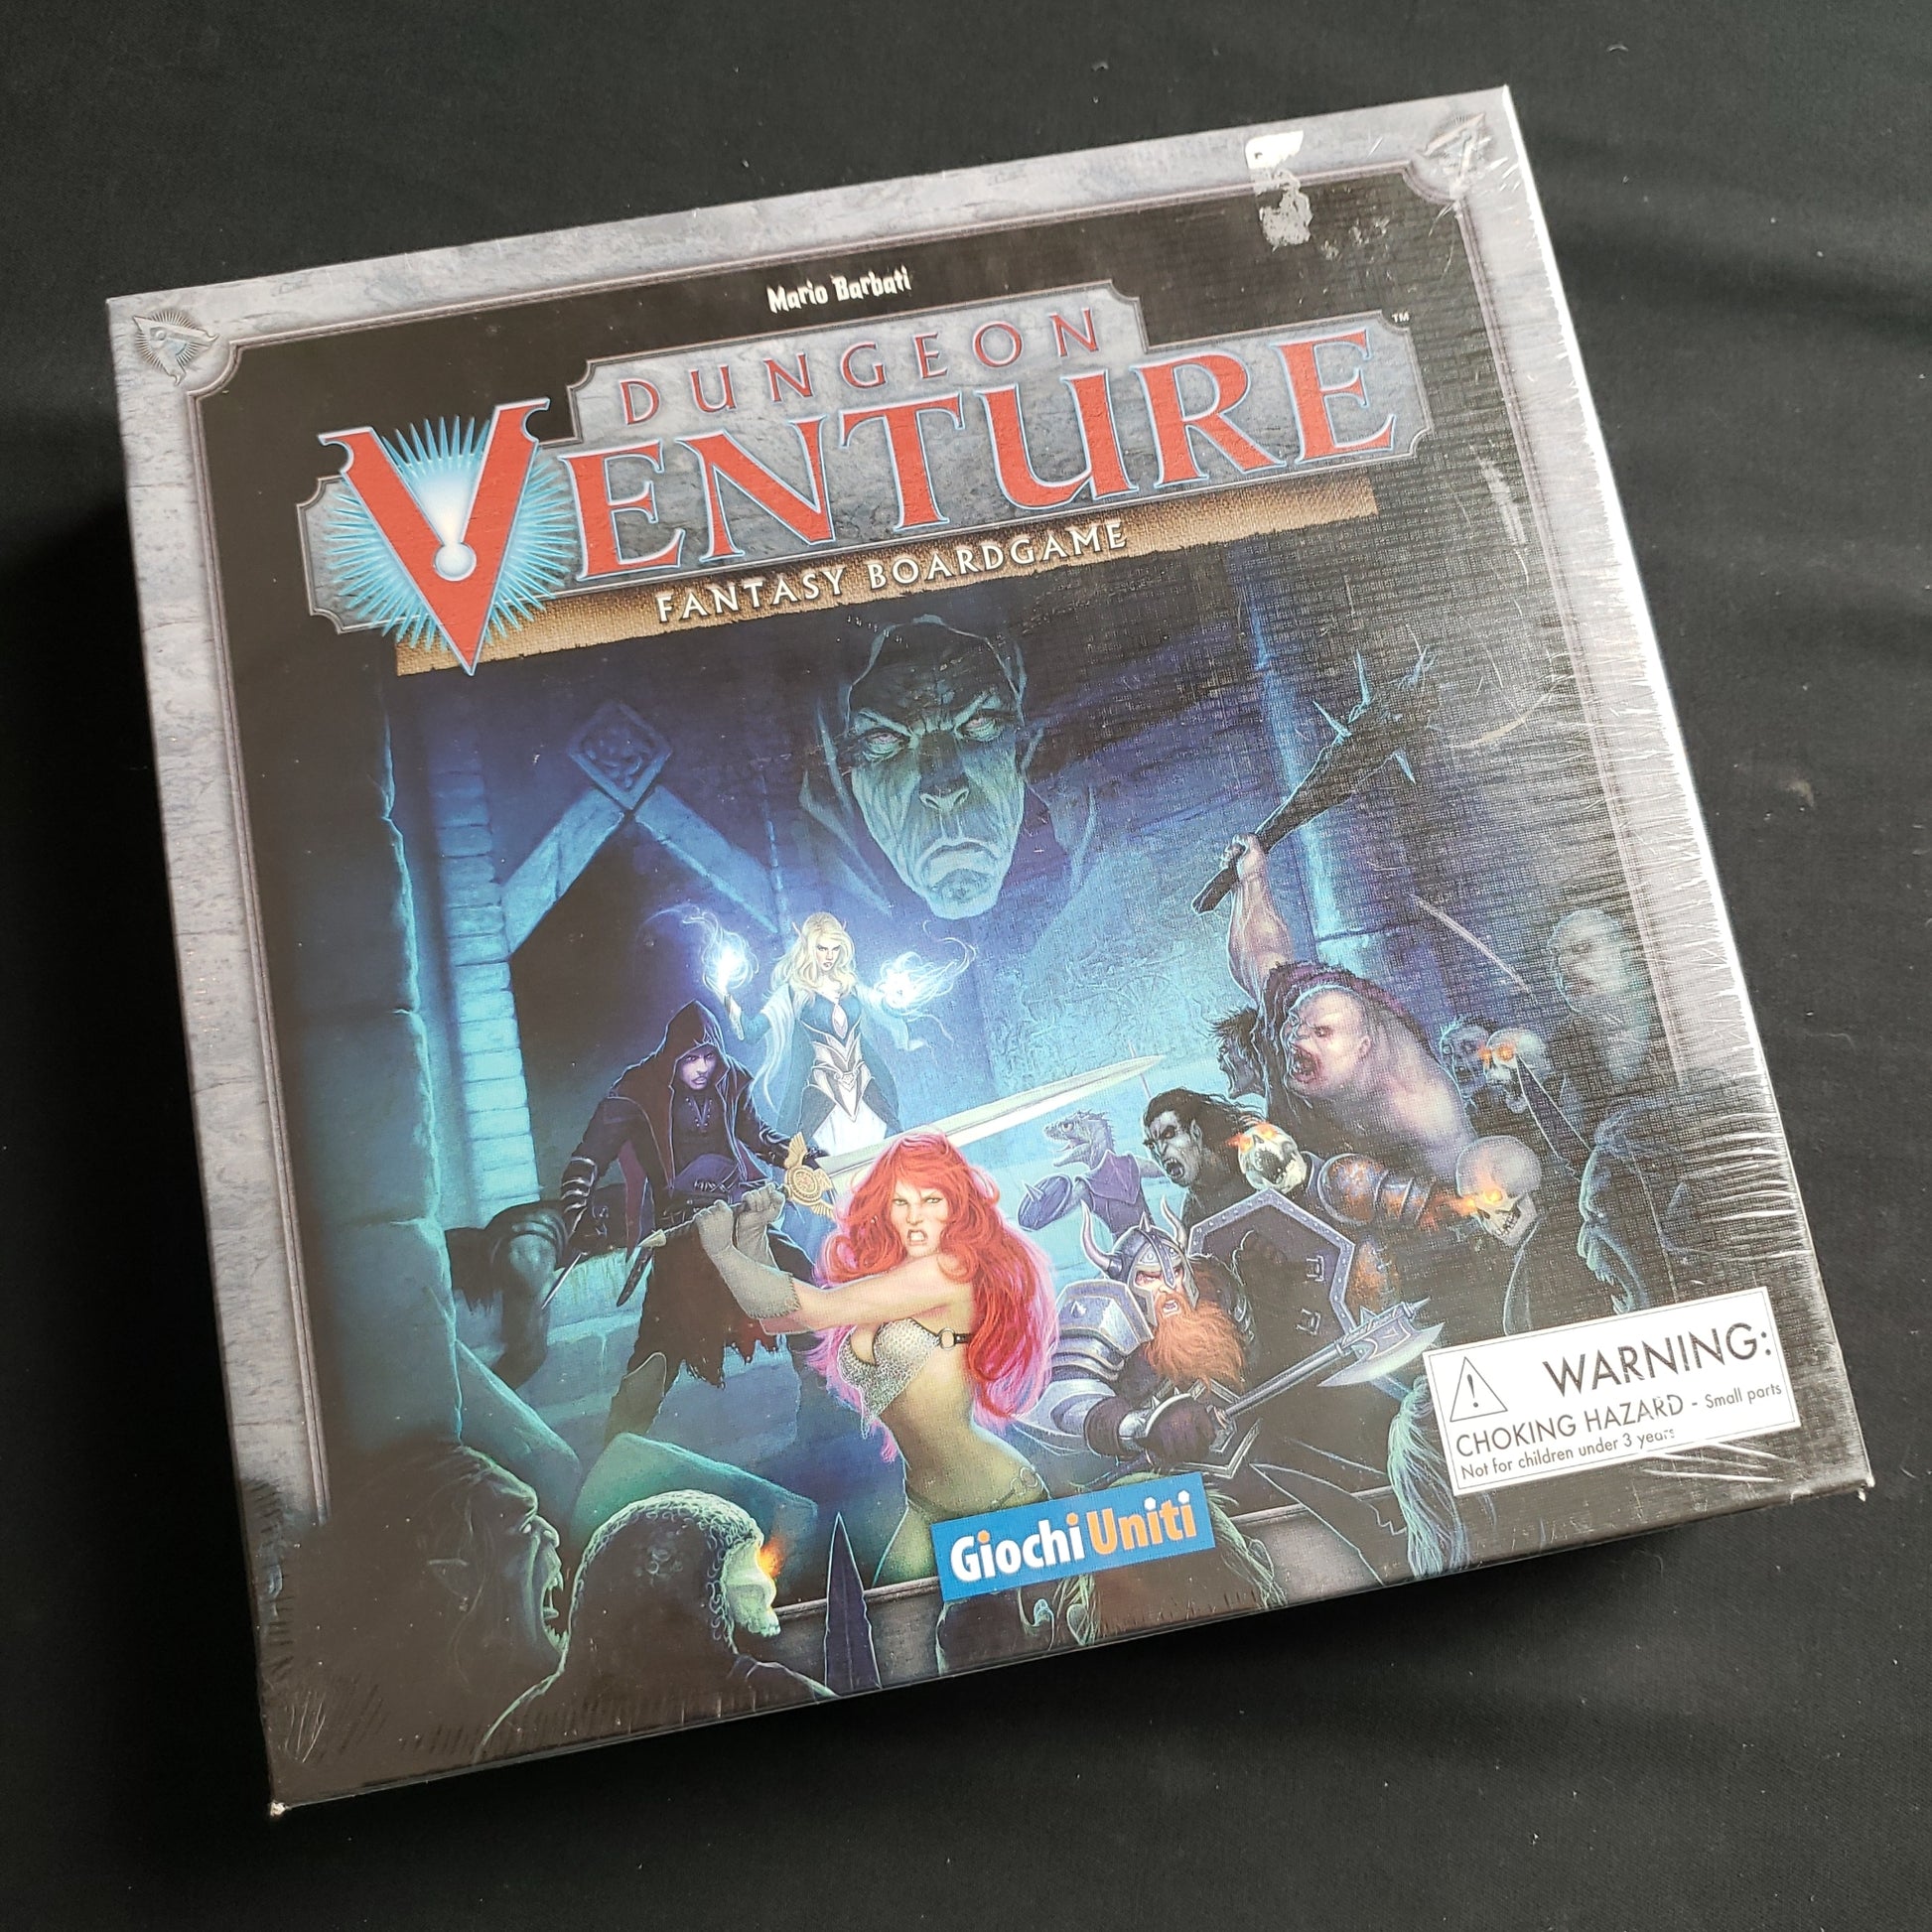 Image shows the front cover of the box of the Dungeon Venture board game